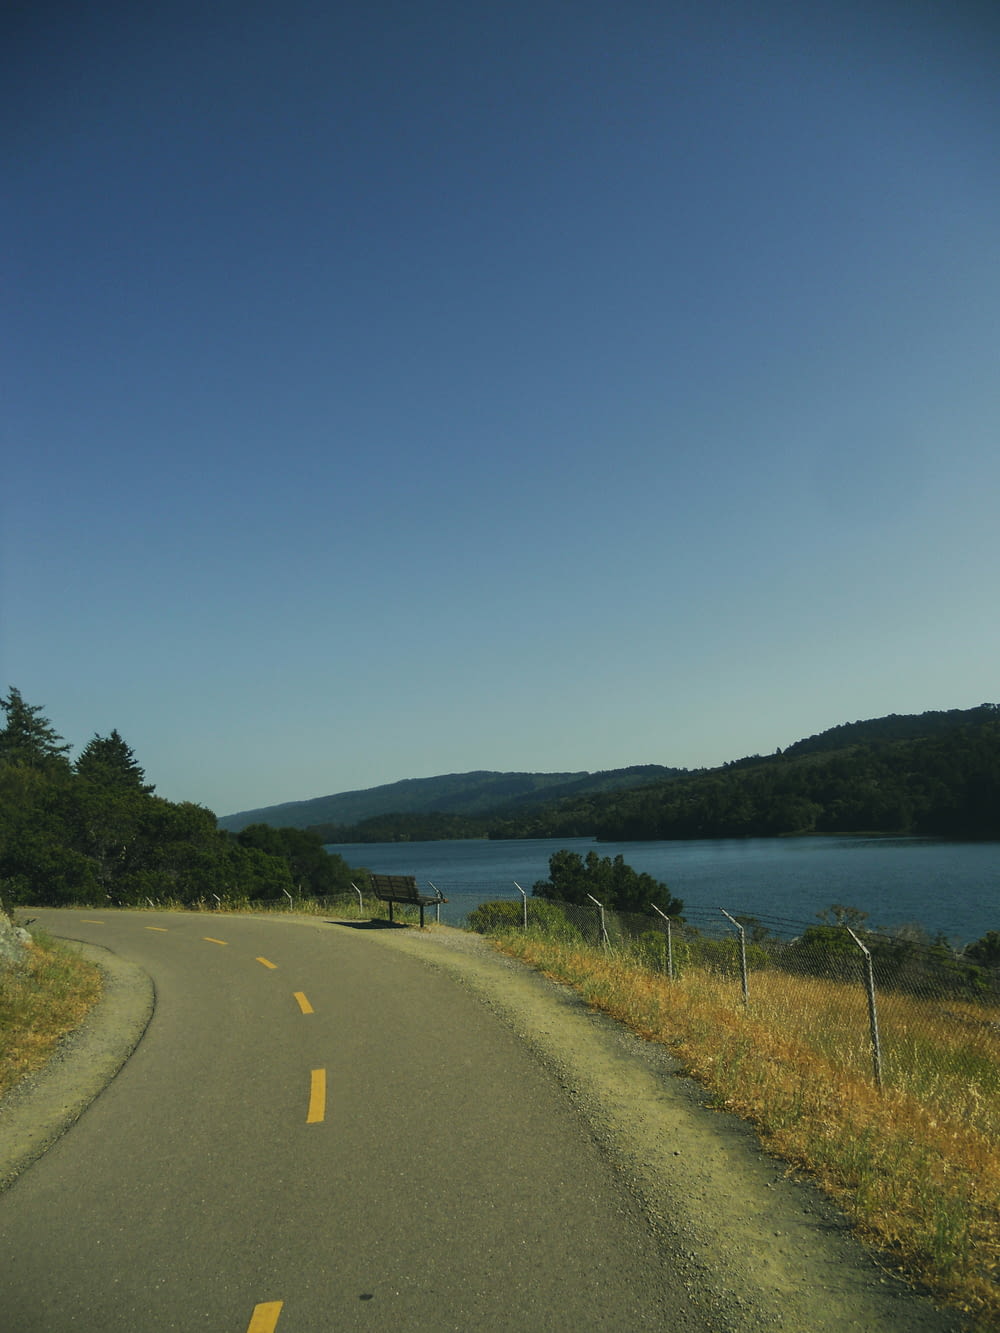 a view of a road next to a body of water